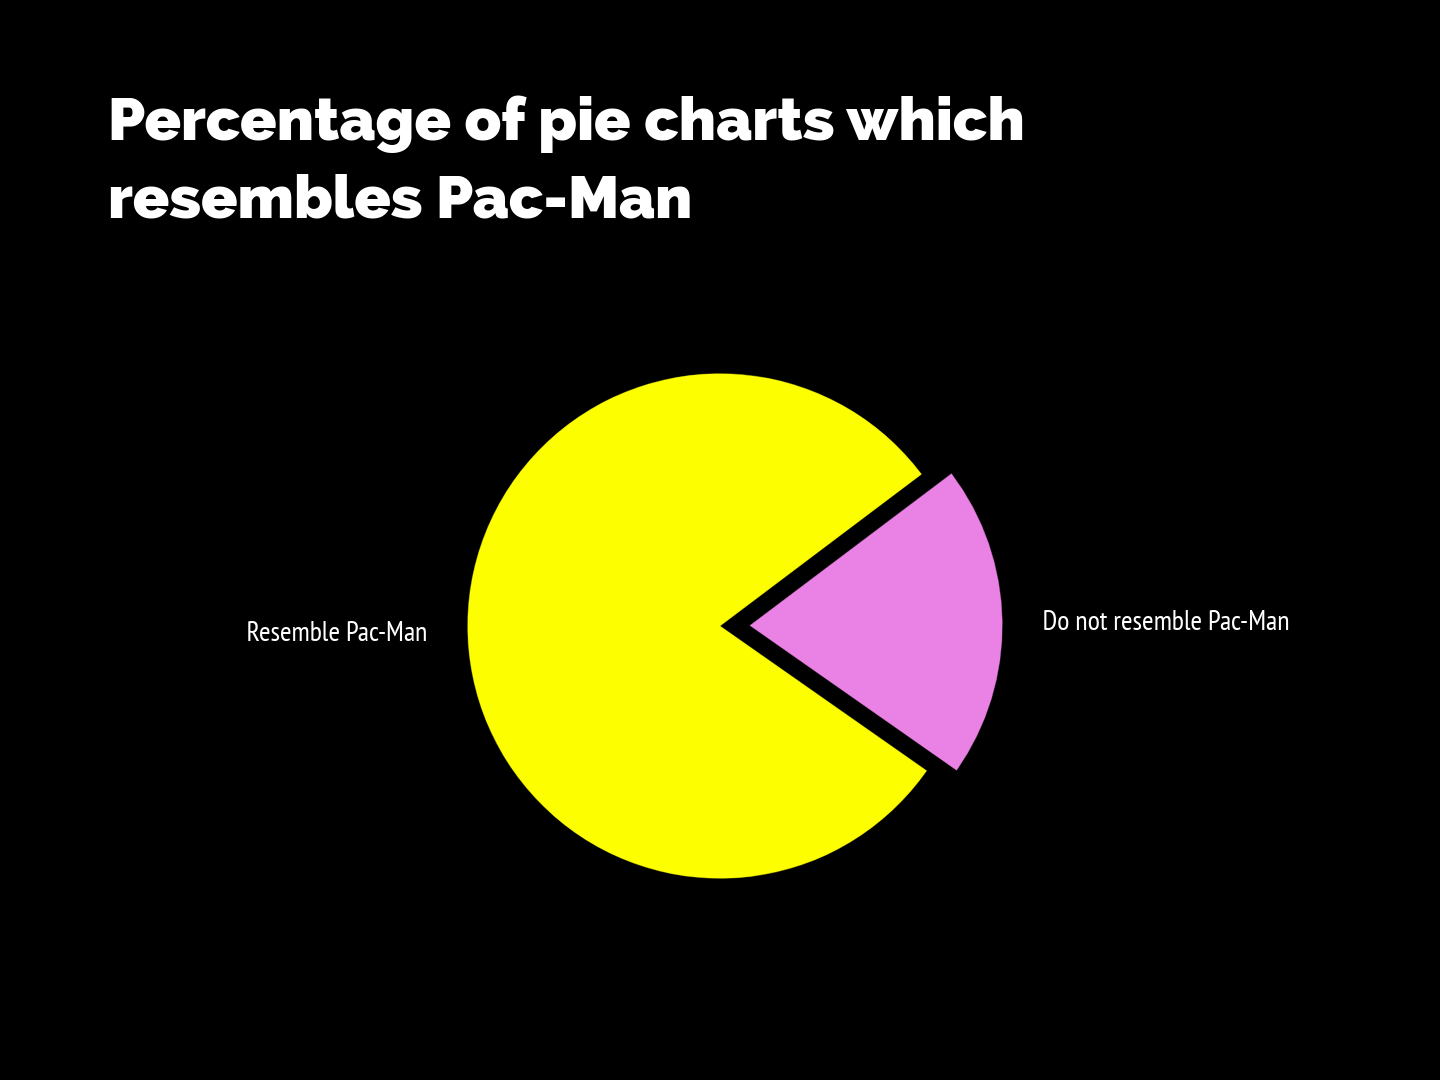 This pie chart resembles the maze arcade game Pac-Man